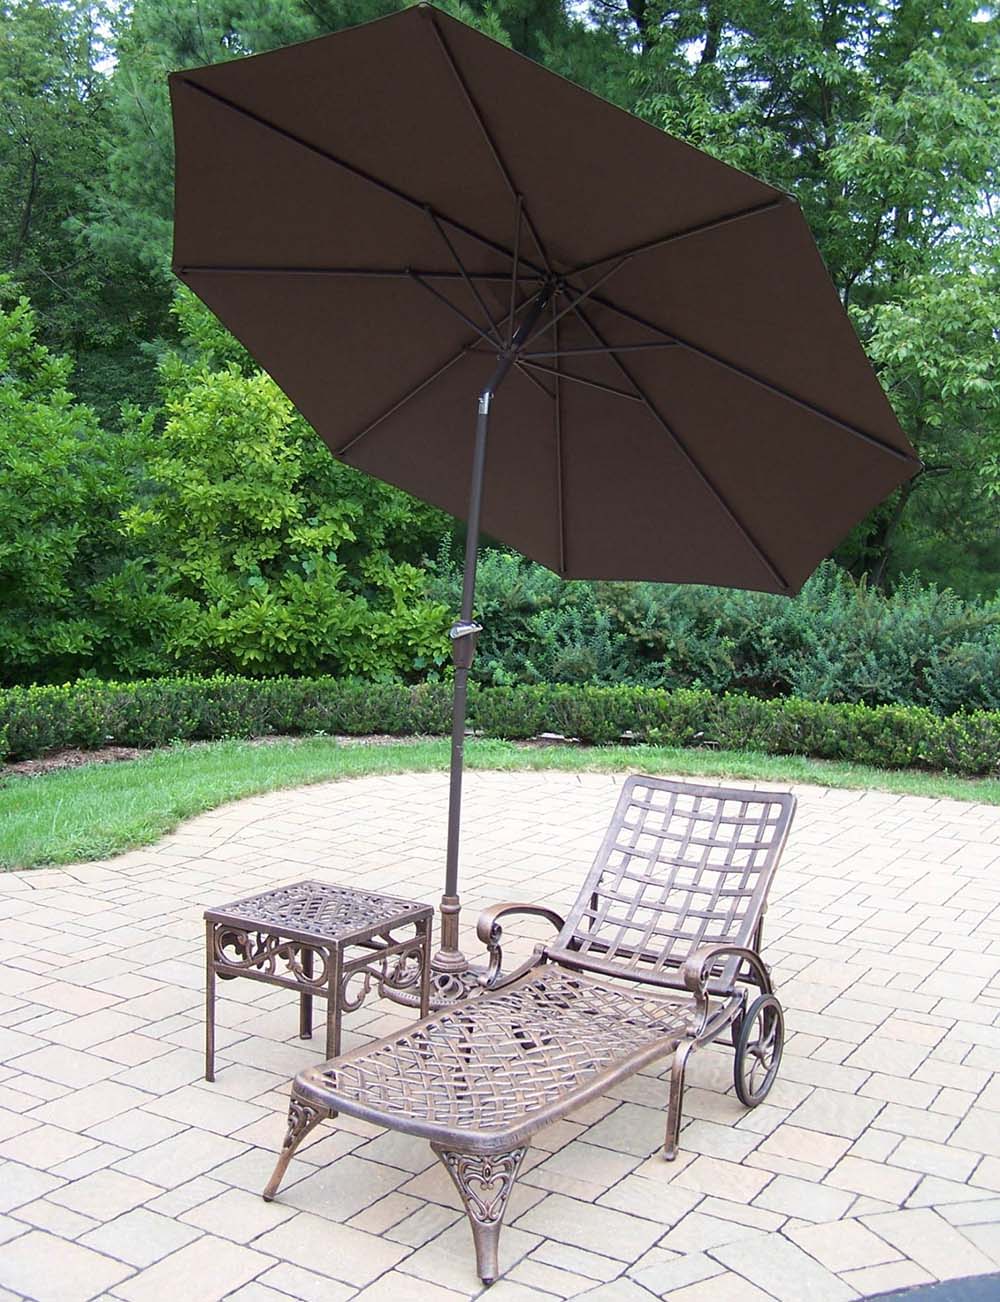 Elite Chaise Lounge: Side Table, Brown Umbrella & Stand